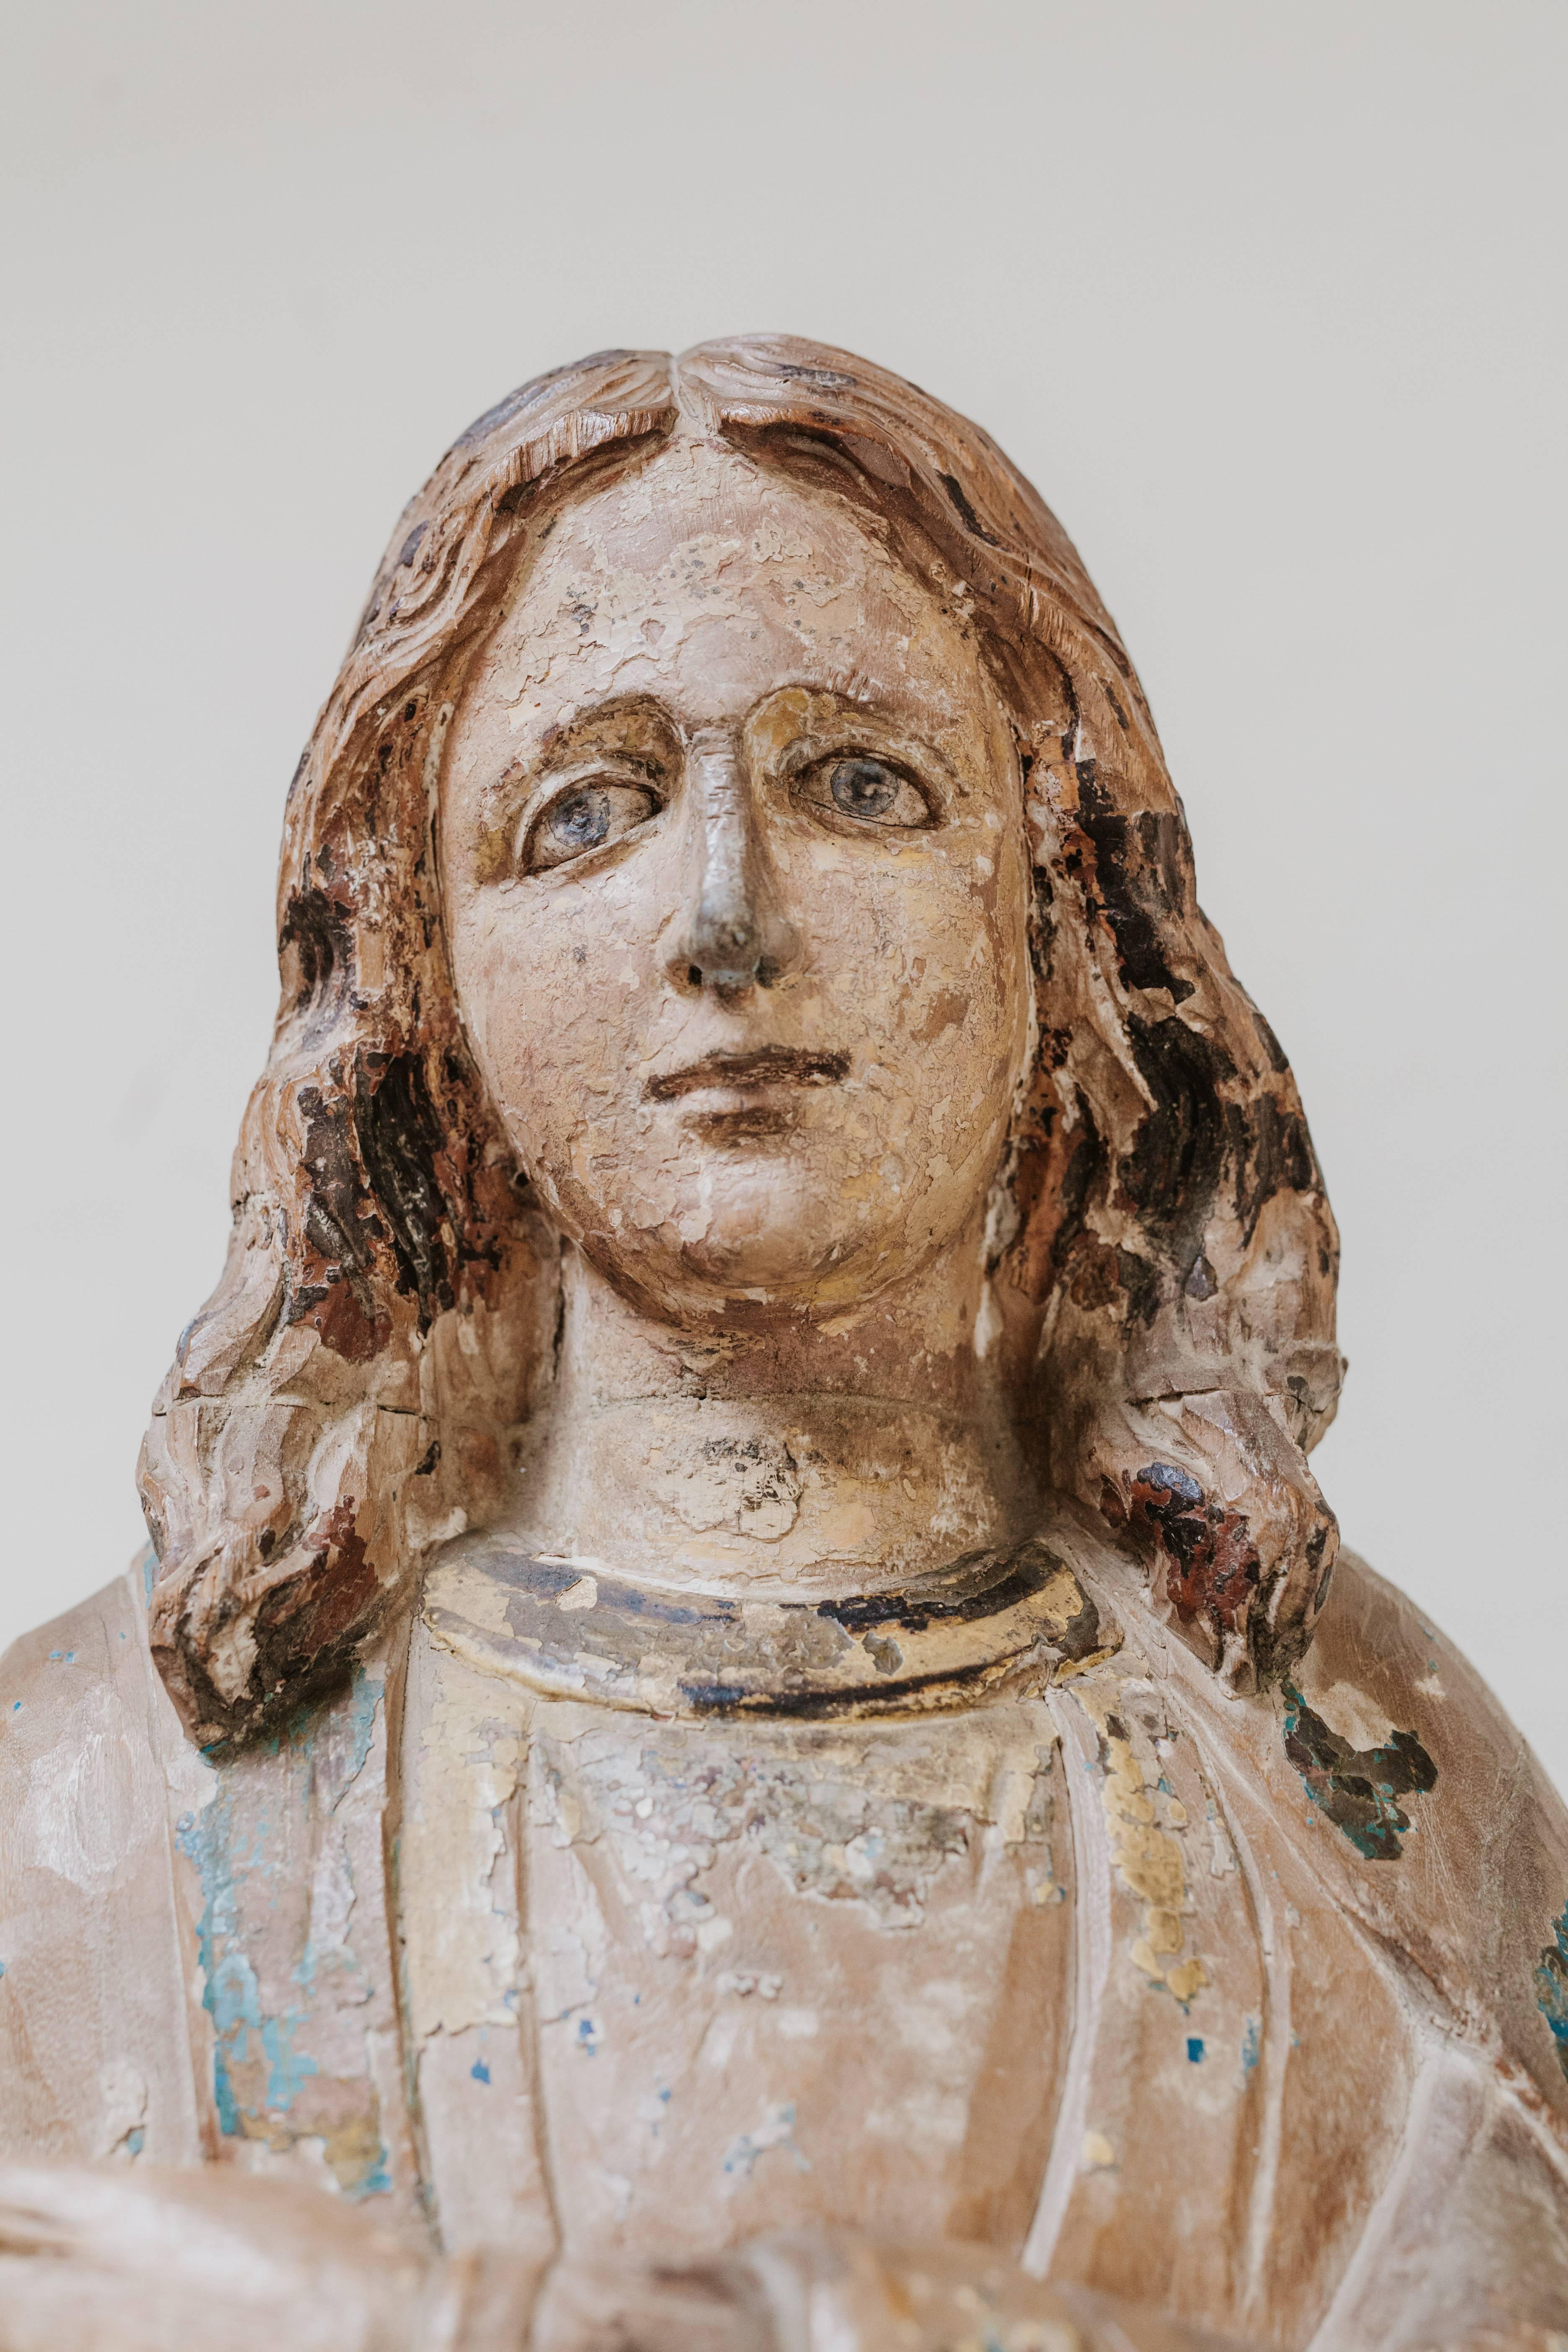 British 17th Century Polychromed Wooden Statue or Sculpture of Saint Helena